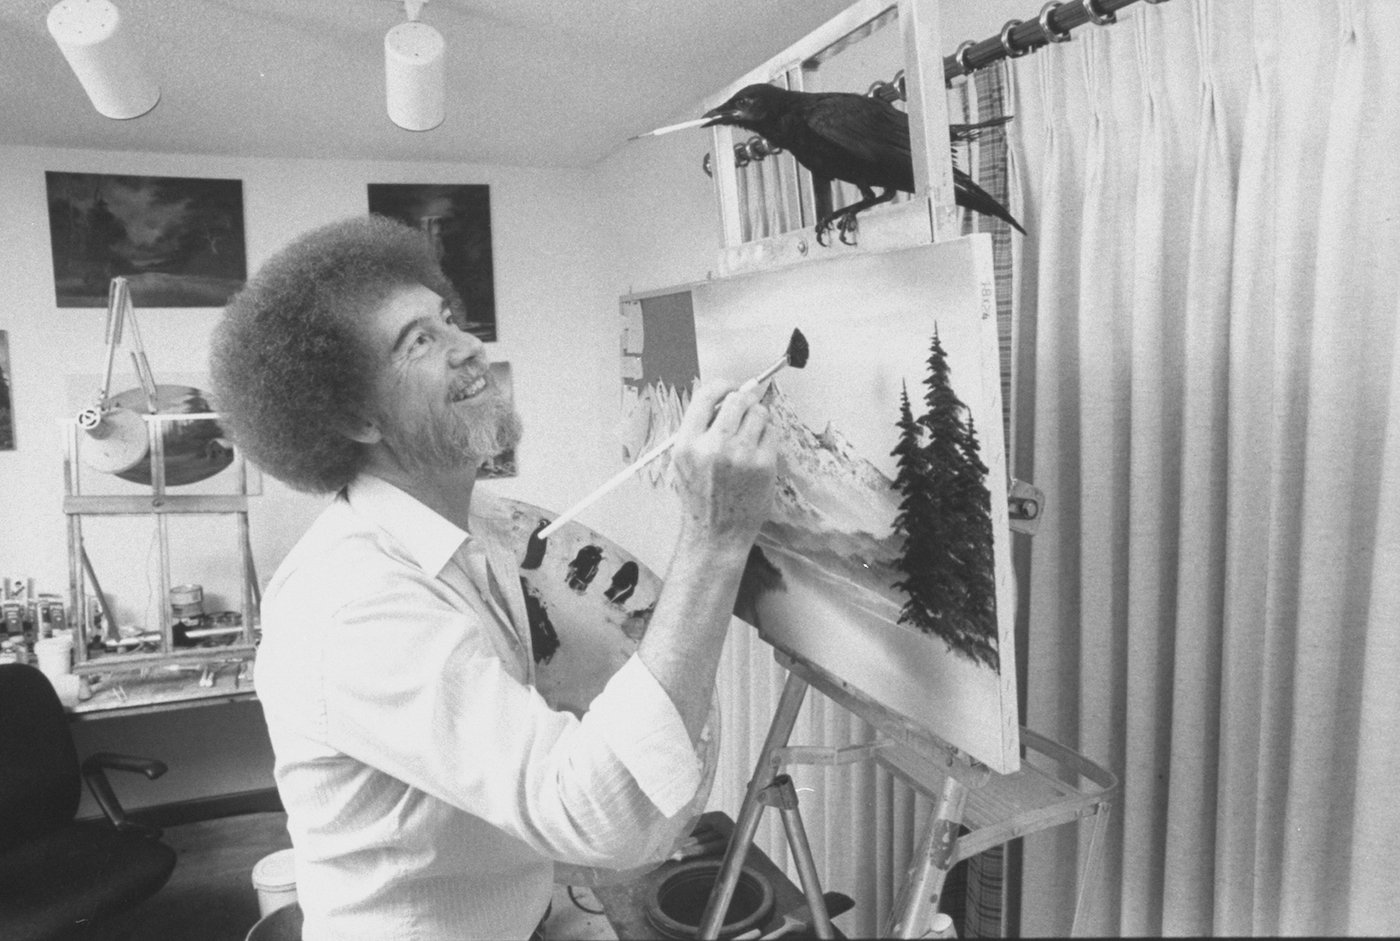 TV painting instructor/artist Bob Ross paints a landscape as his pet crow holds a paintbrush in its beak while perched on Ross's easel